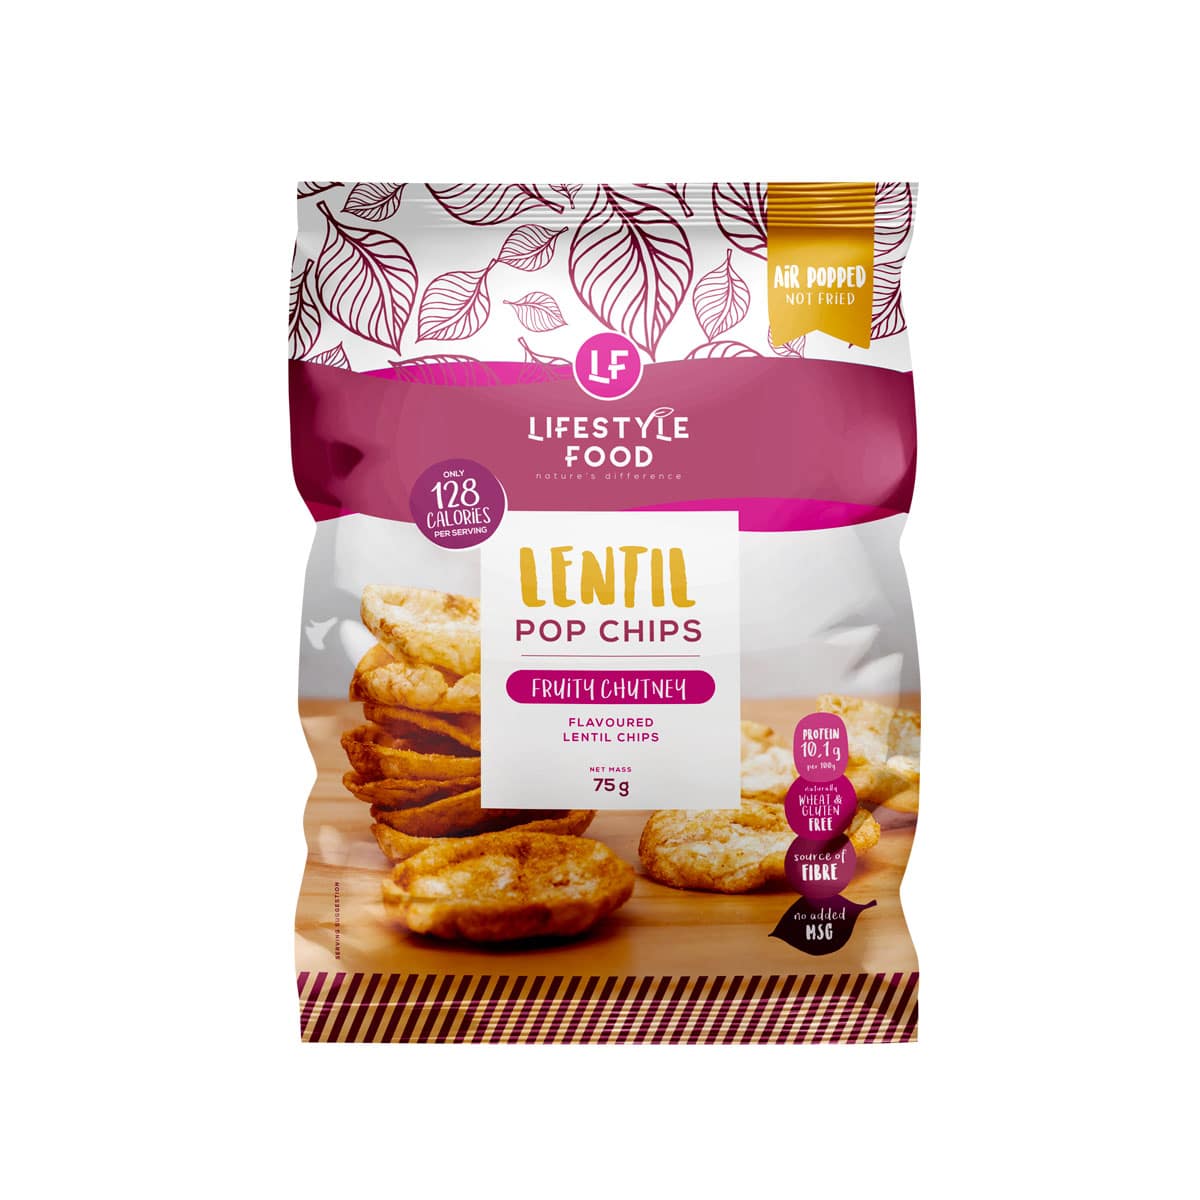 Lifestyle Food Air Popped Chips Fruit Chutney - 75g